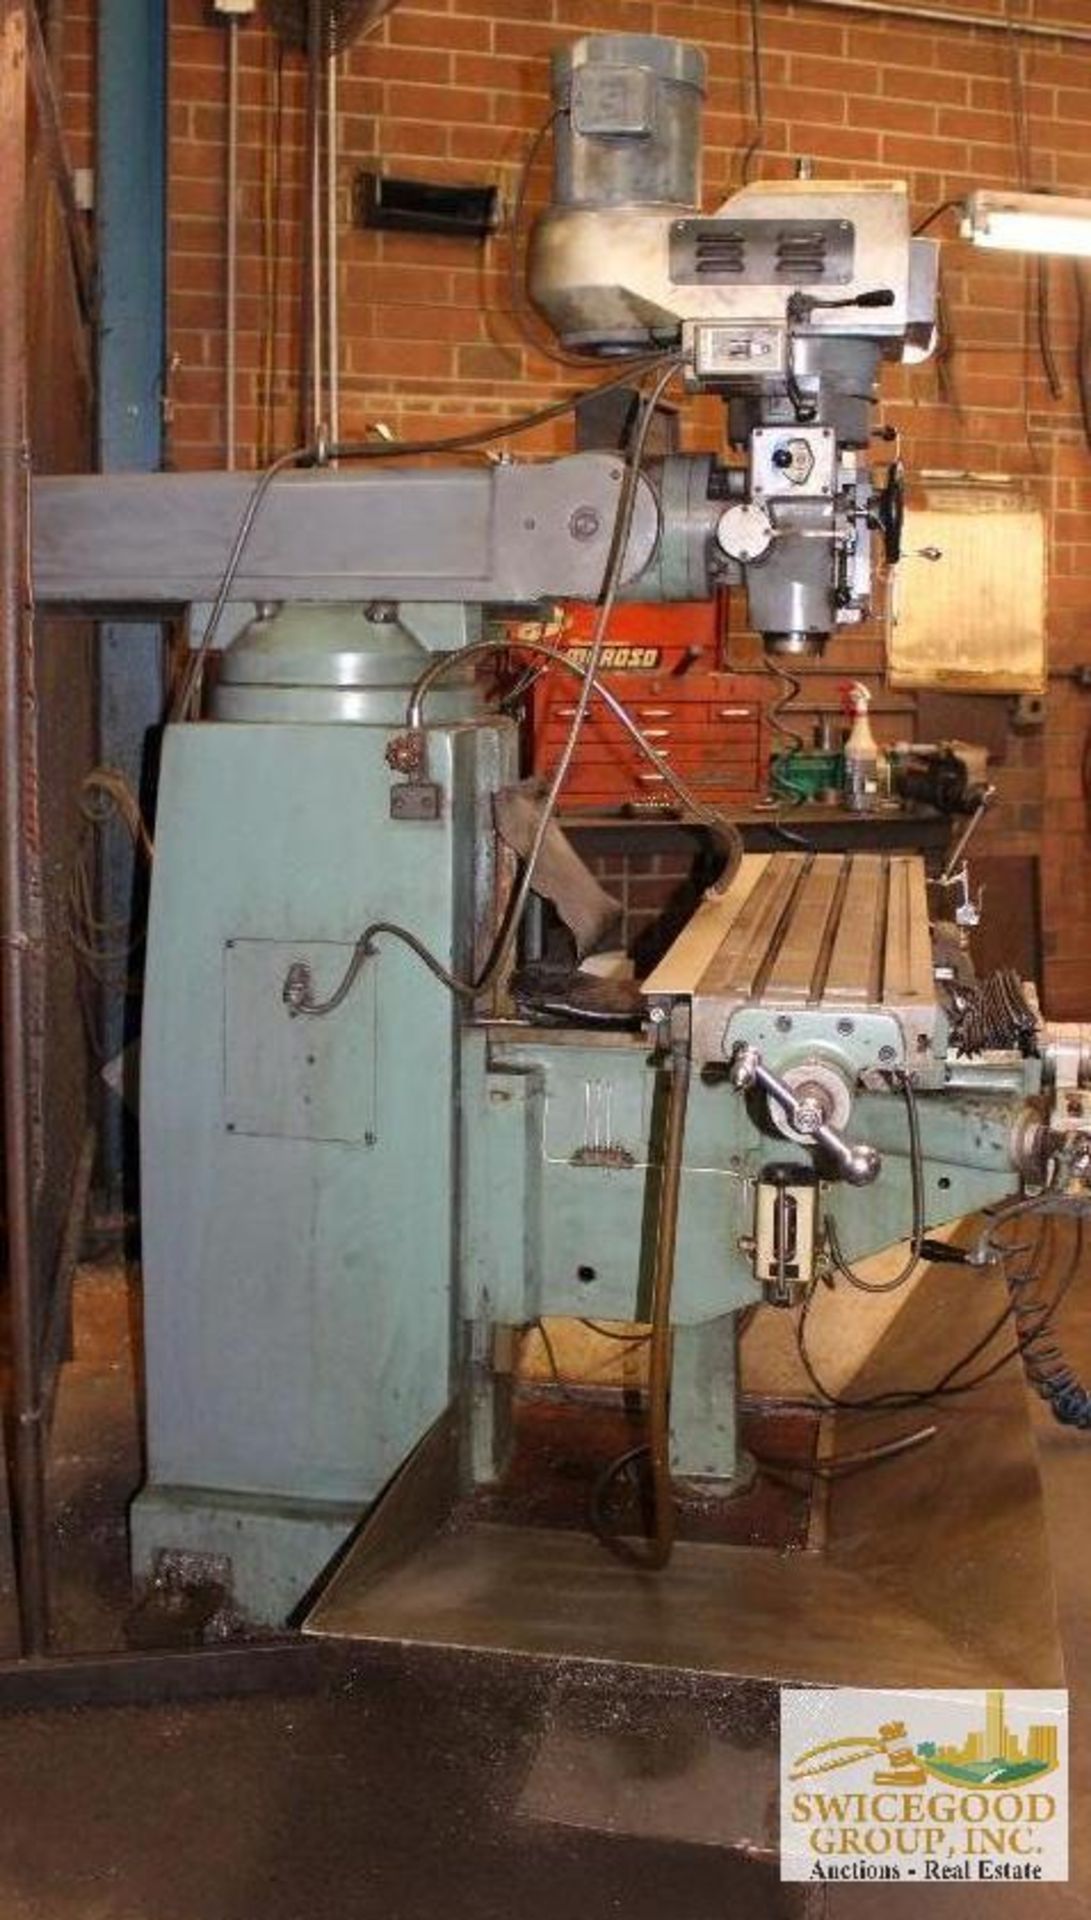 Wellton 48" Bed, Milling Machine - Image 3 of 7